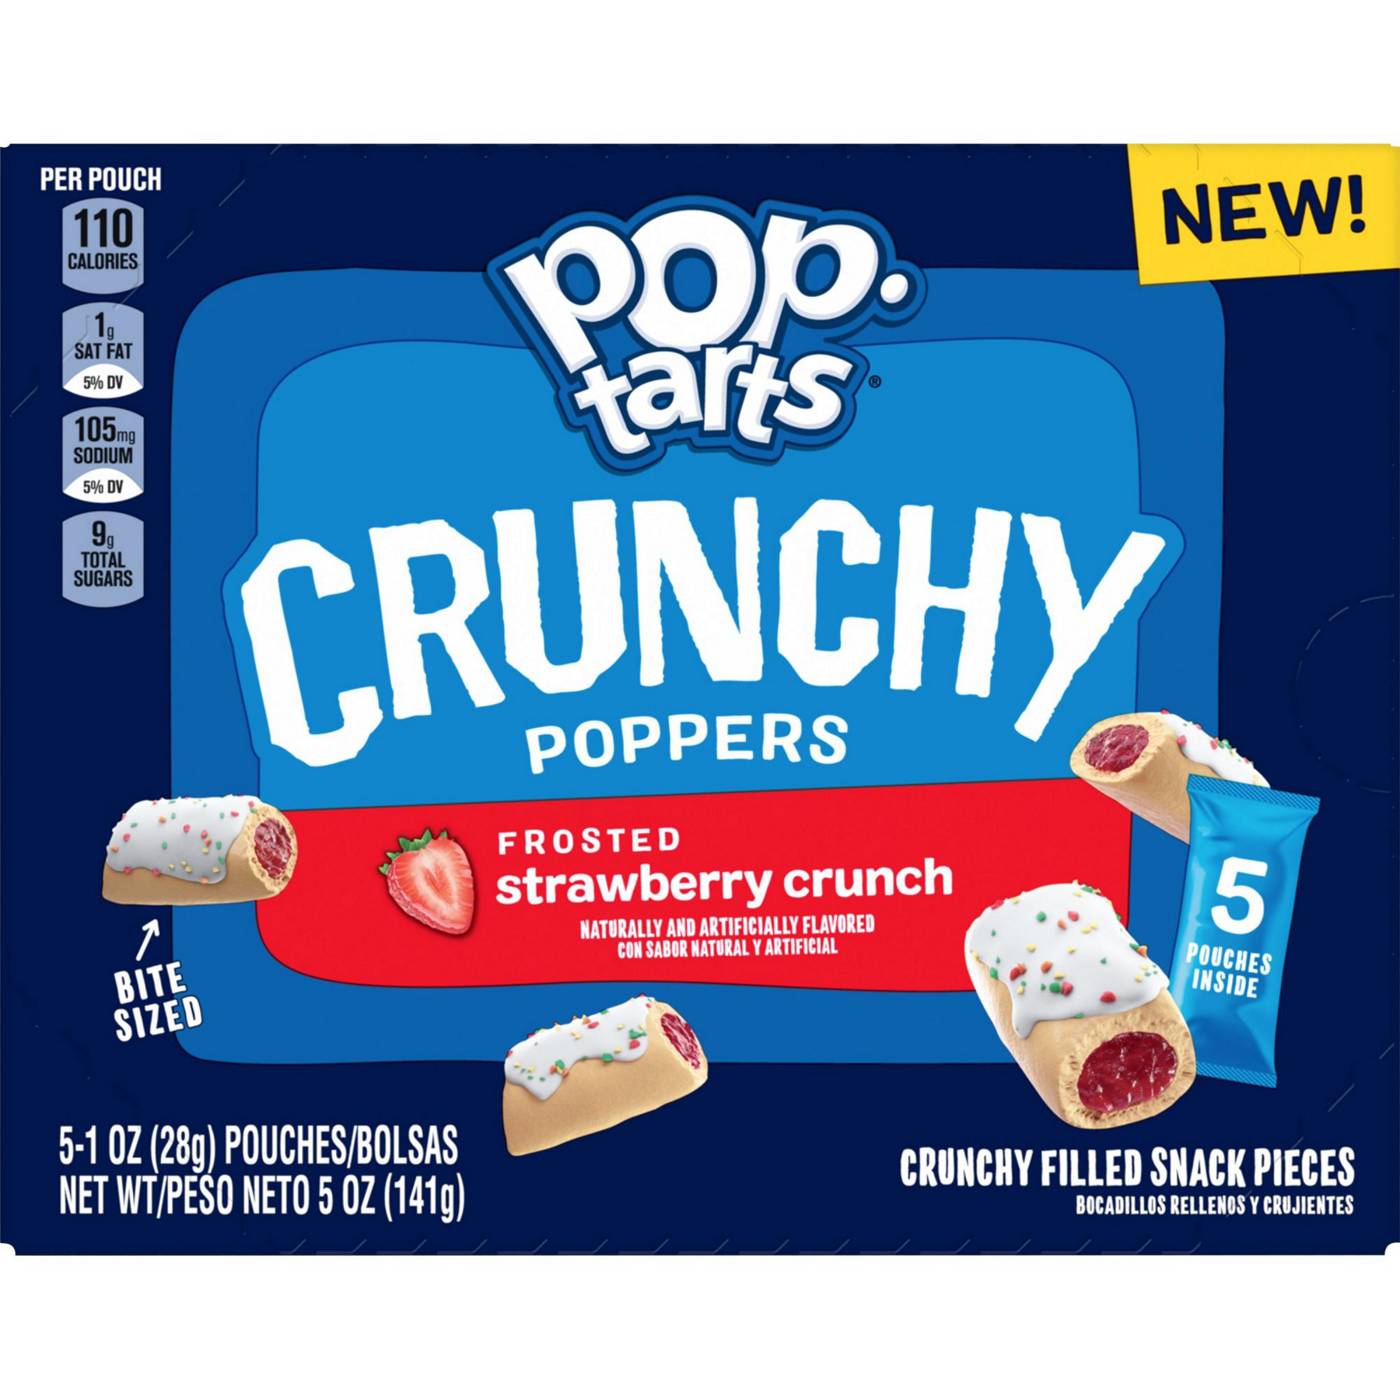 Pop-Tarts Crunchy Poppers Frosted Strawberry Crunch Crunchy Filled Snack Pieces; image 3 of 6